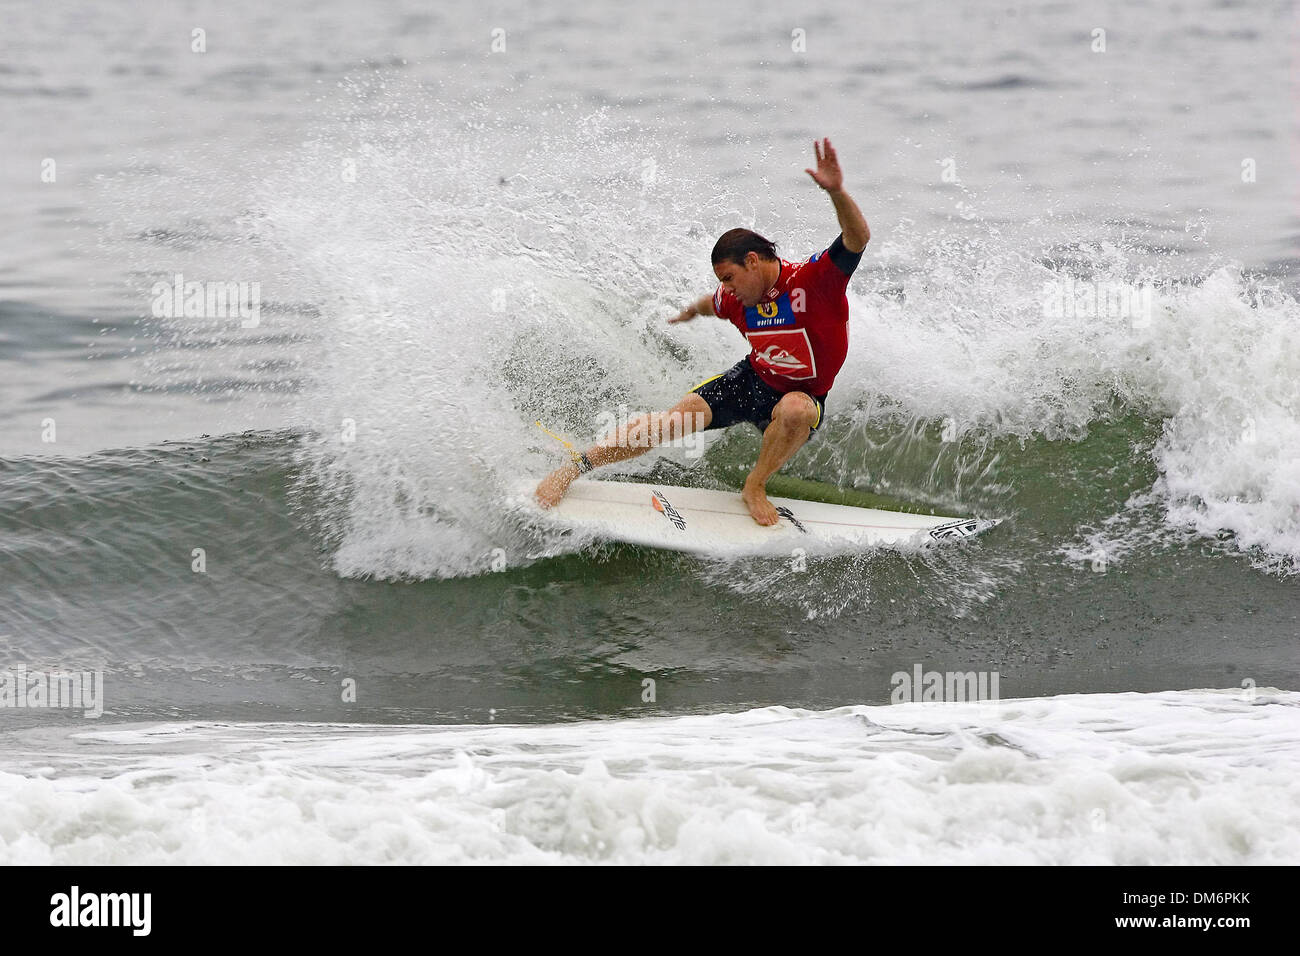 Aug 31, 2005; Chiba, JAPAN; PHIL MACDONALD (Tomakin , NSW, Australia), opened the Quiksilver Pro Japan with a convincing round one heat win defeating Tim Curran (USA) and Marcello Nunes (Bra). The Quiksilver Pro Japan is the seventh of 11 events on the 2005 Fosters menÕs ASP World Championship Tour (WCT) and features the top 45 surfers in world and three wild card surfers. Floridia Stock Photo